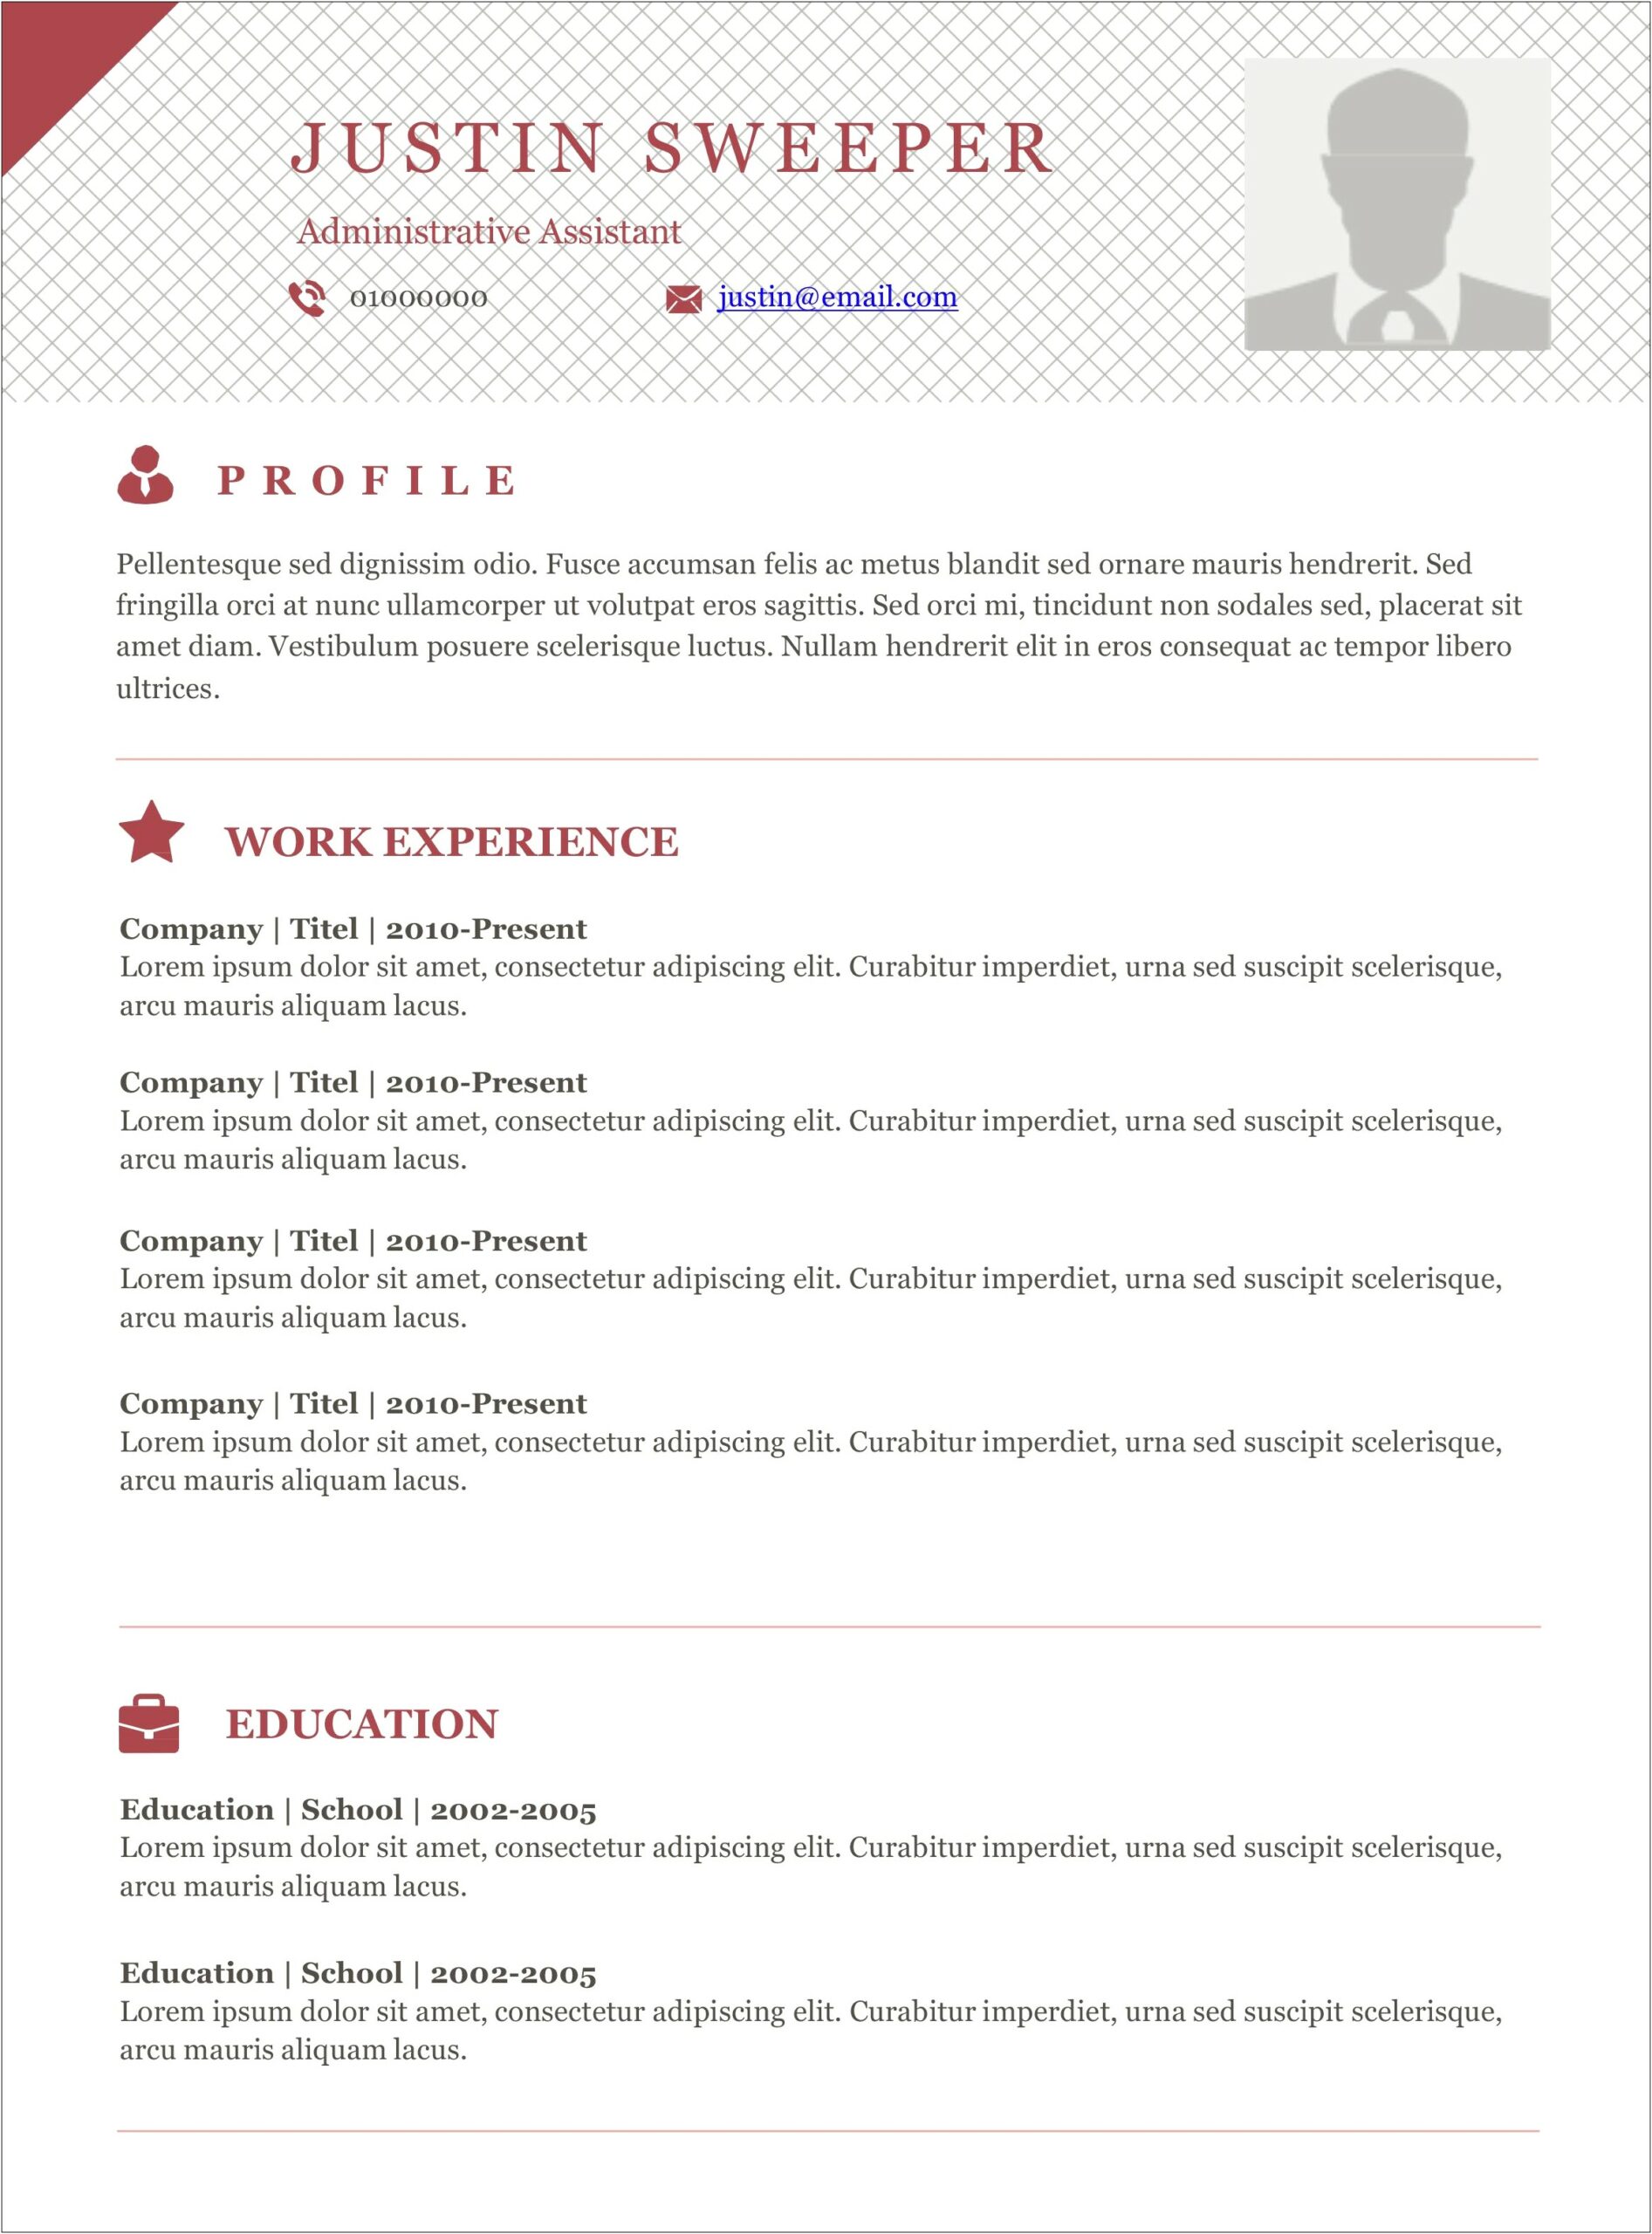 Free Resume Templates With No Hidden Fees